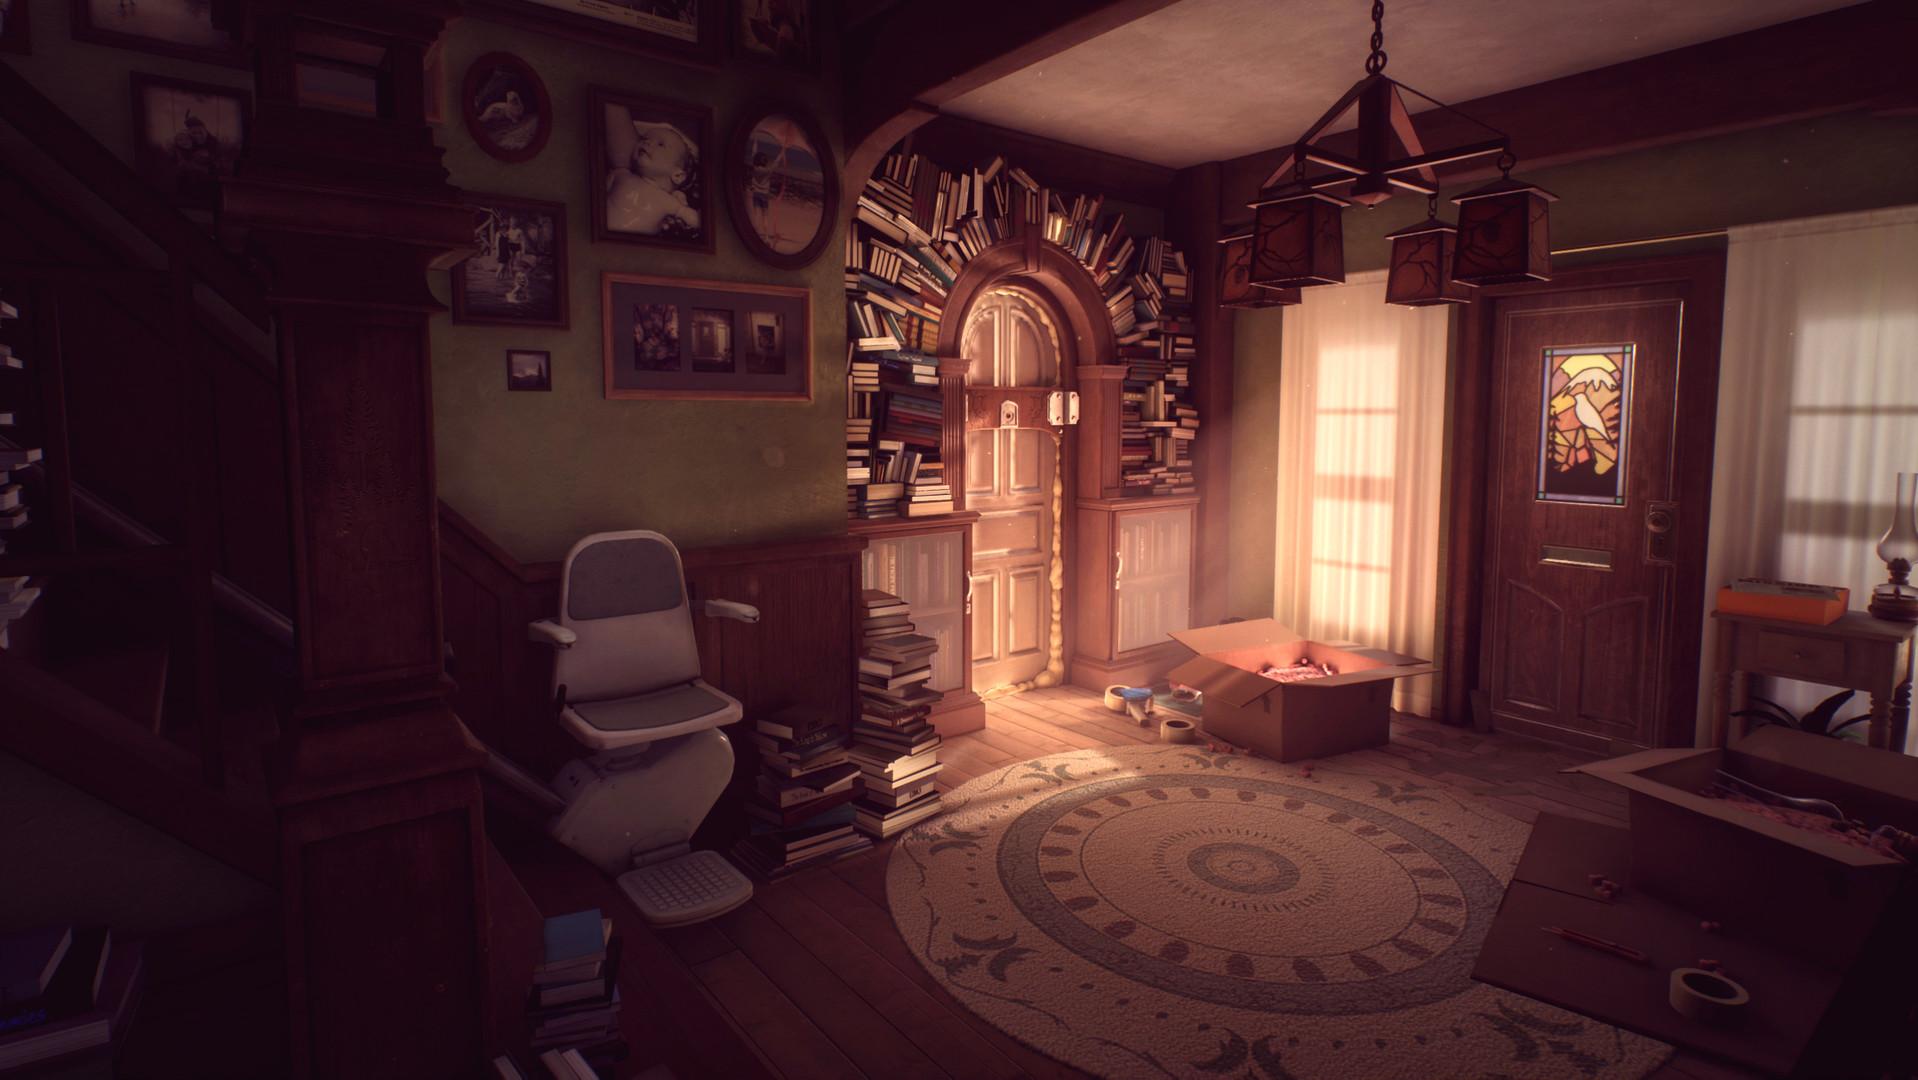 Screenshot №2 from game What Remains of Edith Finch